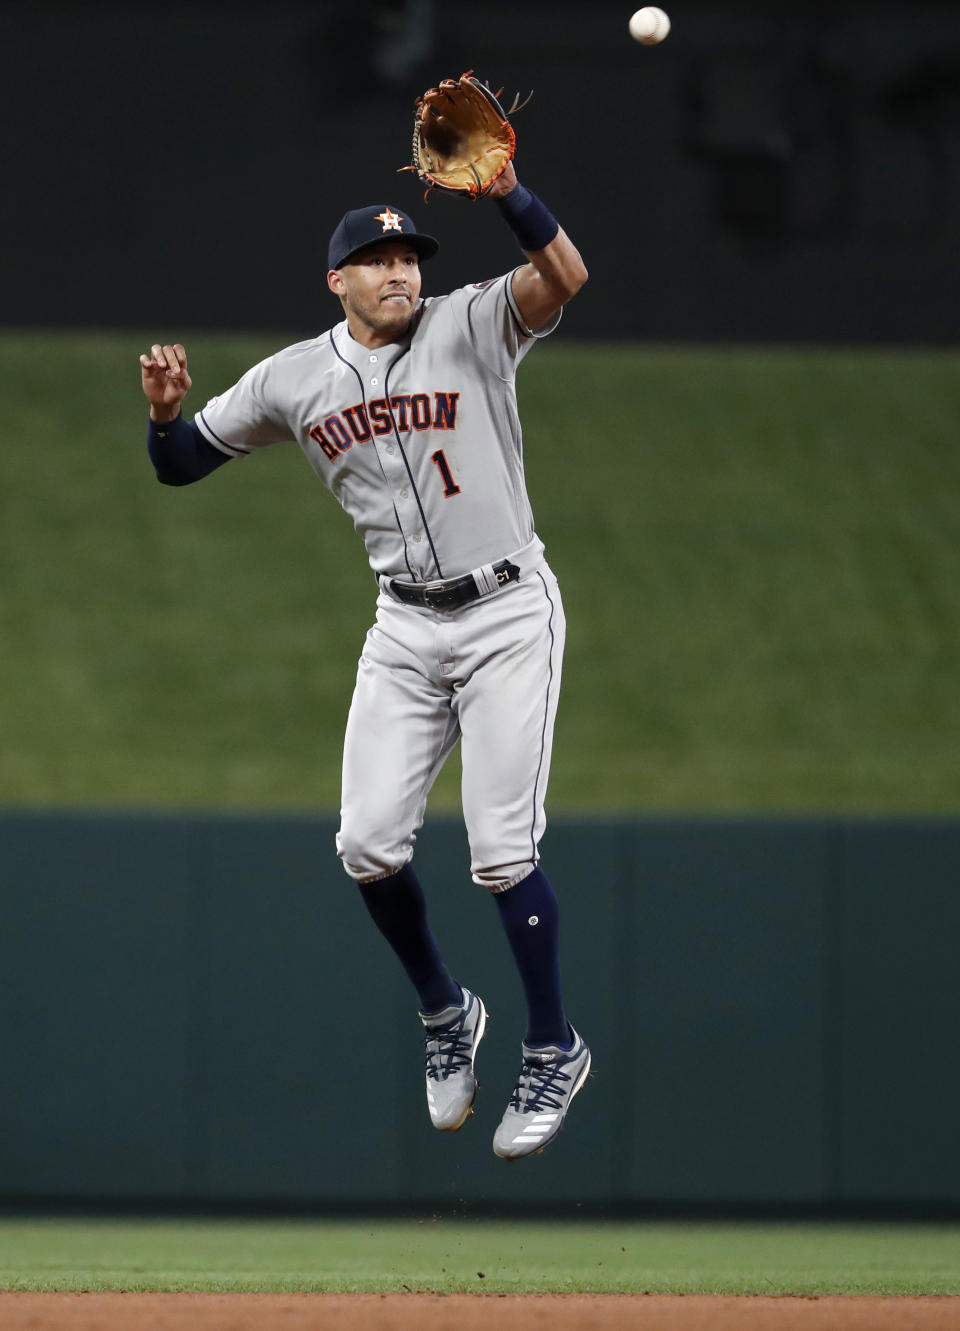 Houston Astros shortstop Carlos Correa leaps to catch a line drive by St. Louis Cardinals' Tyler O'Neill to end the sixth inning of a baseball game Friday, July 26, 2019, in St. Louis. (AP Photo/Jeff Roberson)